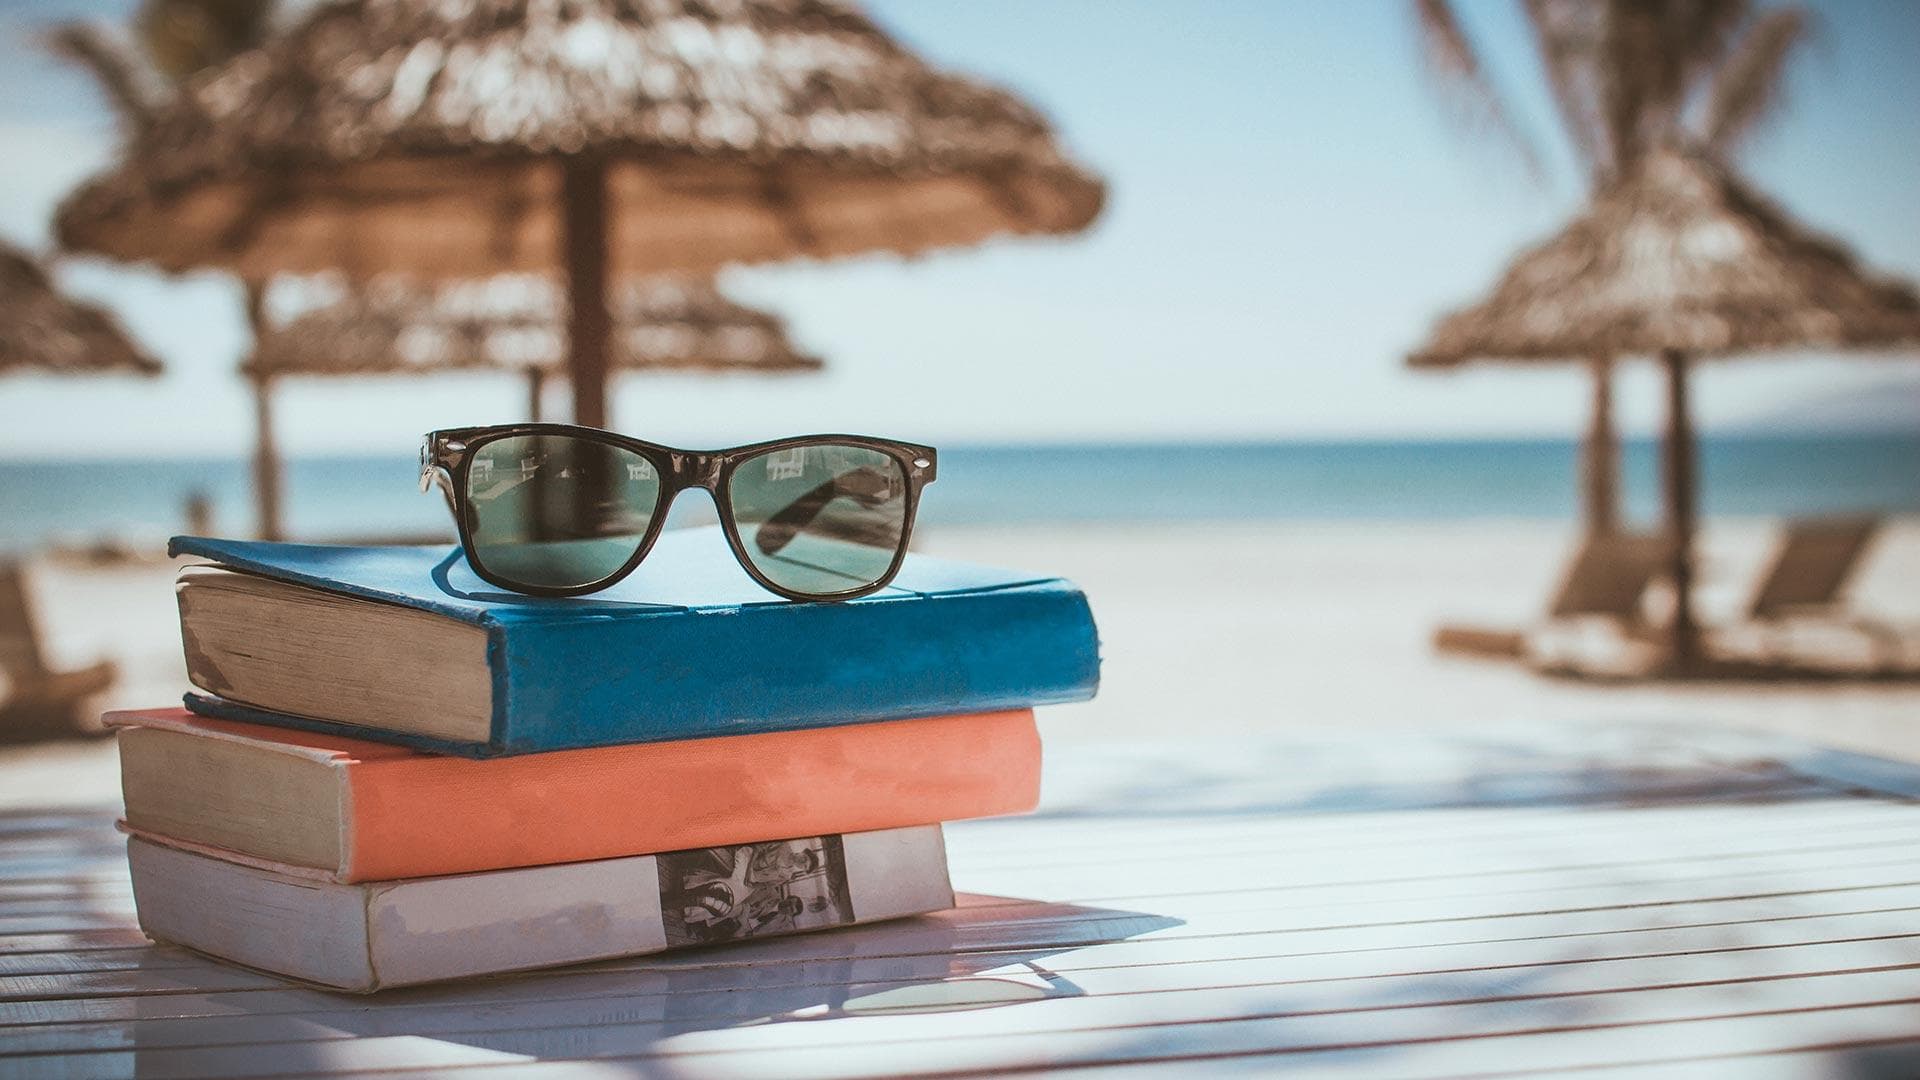 sunglasses on top of stack of three books at the beach